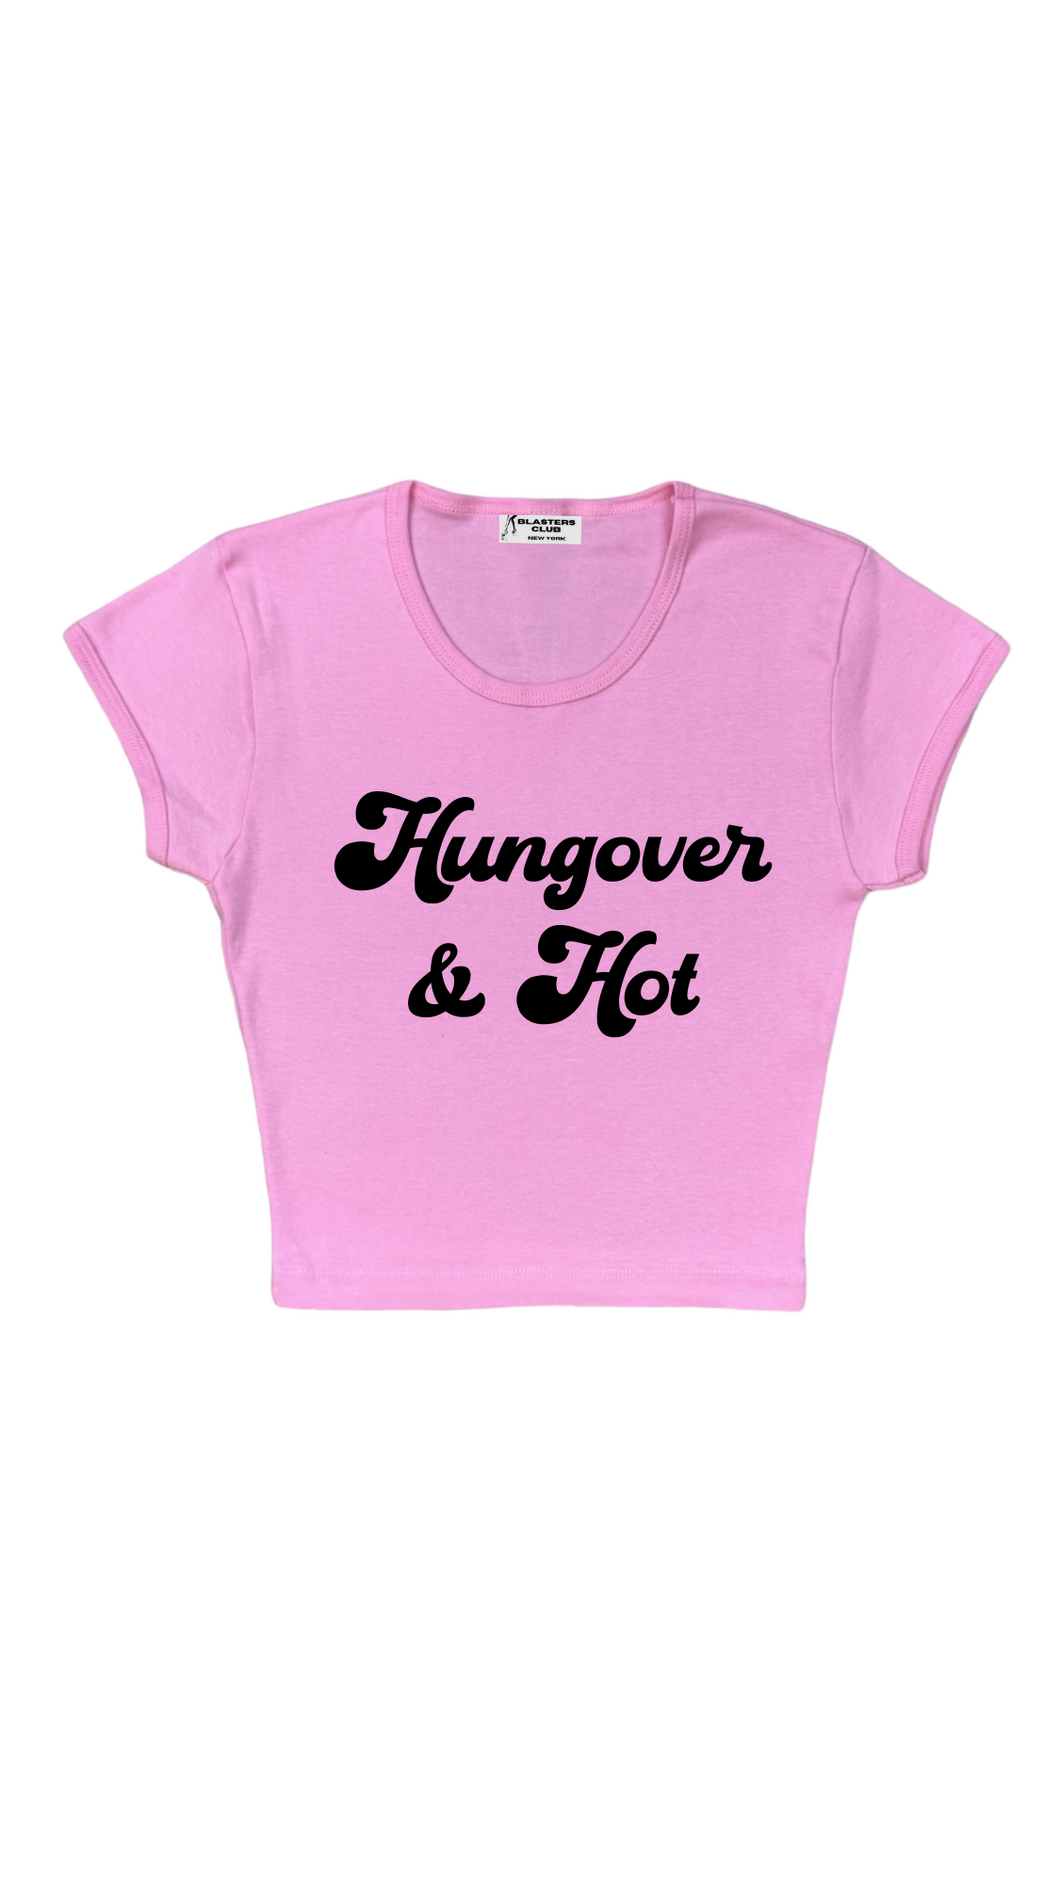 Hungover & Hot Crop Baby Tee in Pink